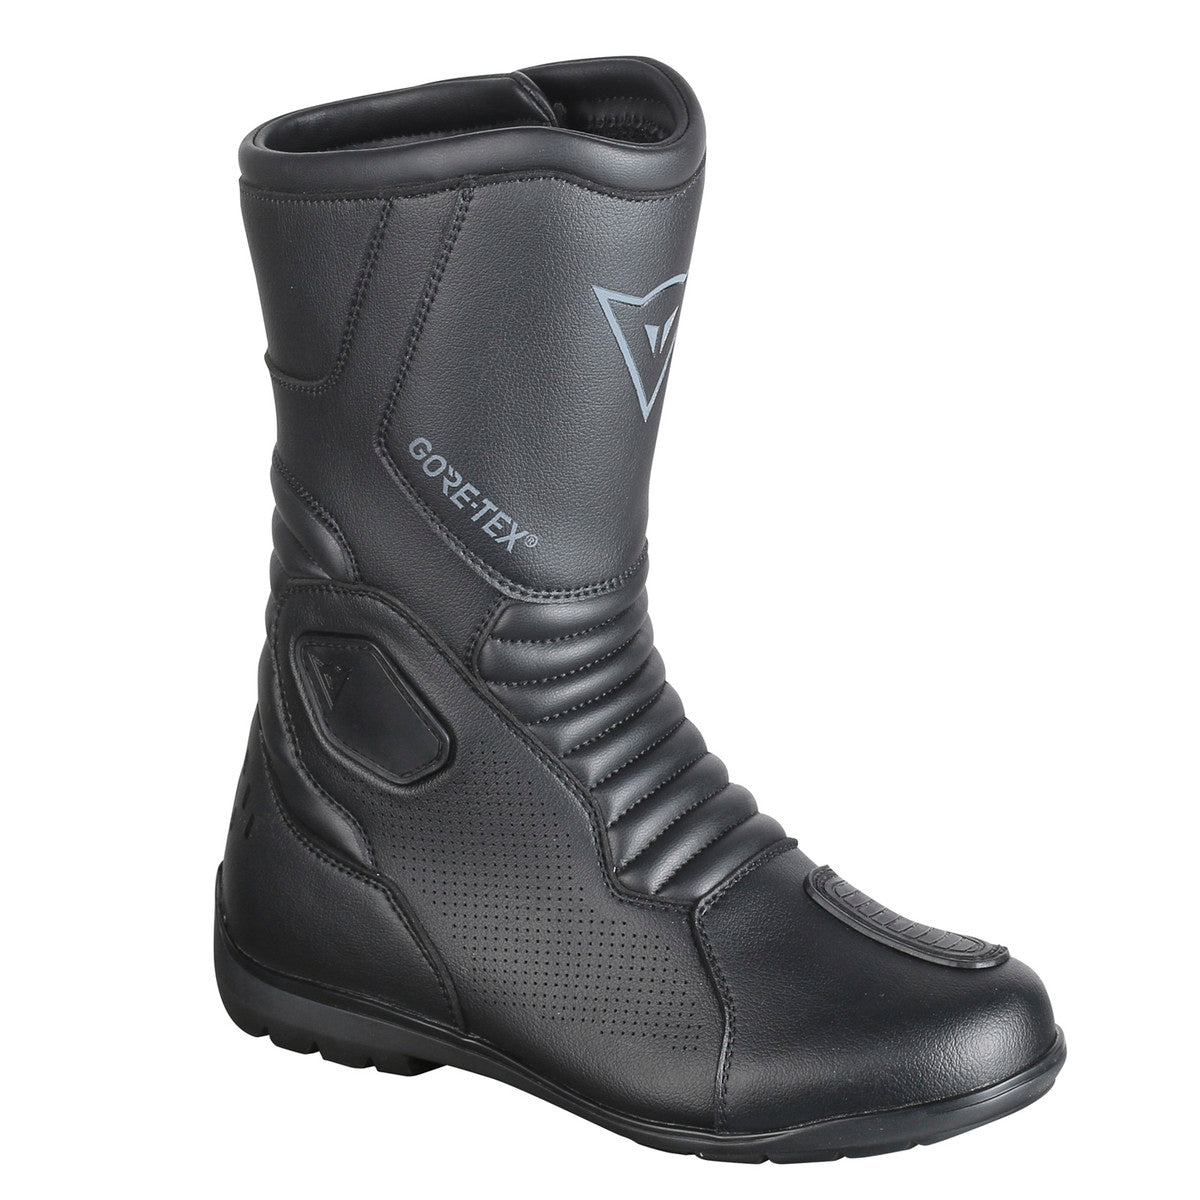 Dainese Freeland Lady Gore-Tex Boots - Black